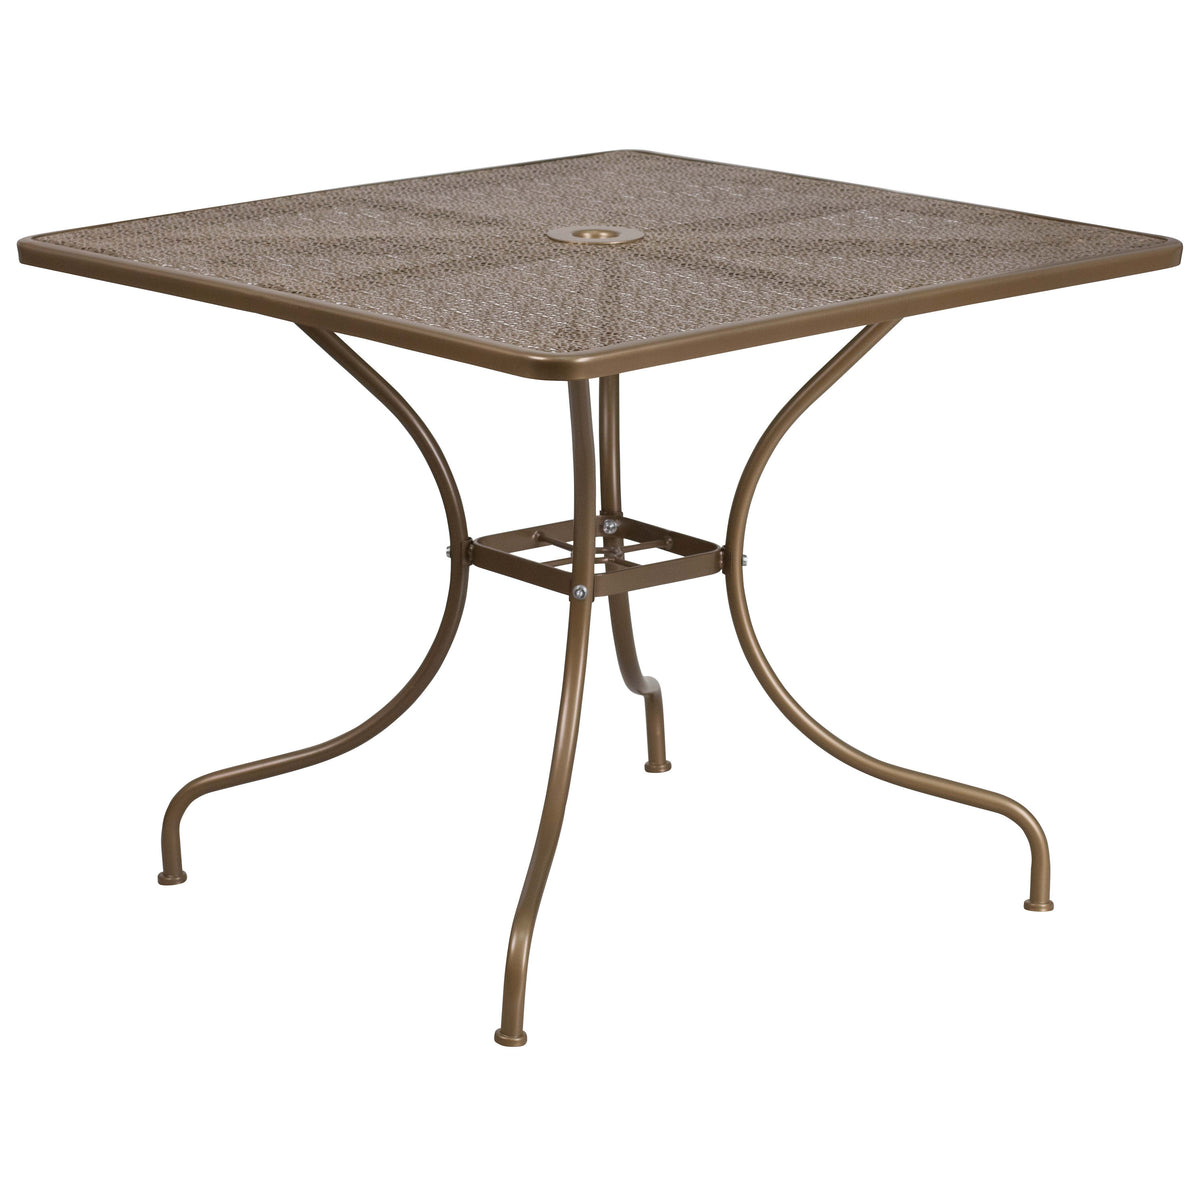 Gold |#| 35.5inch Square Gold Indoor-Outdoor Steel Patio Table Set w/ 2 Square Back Chairs